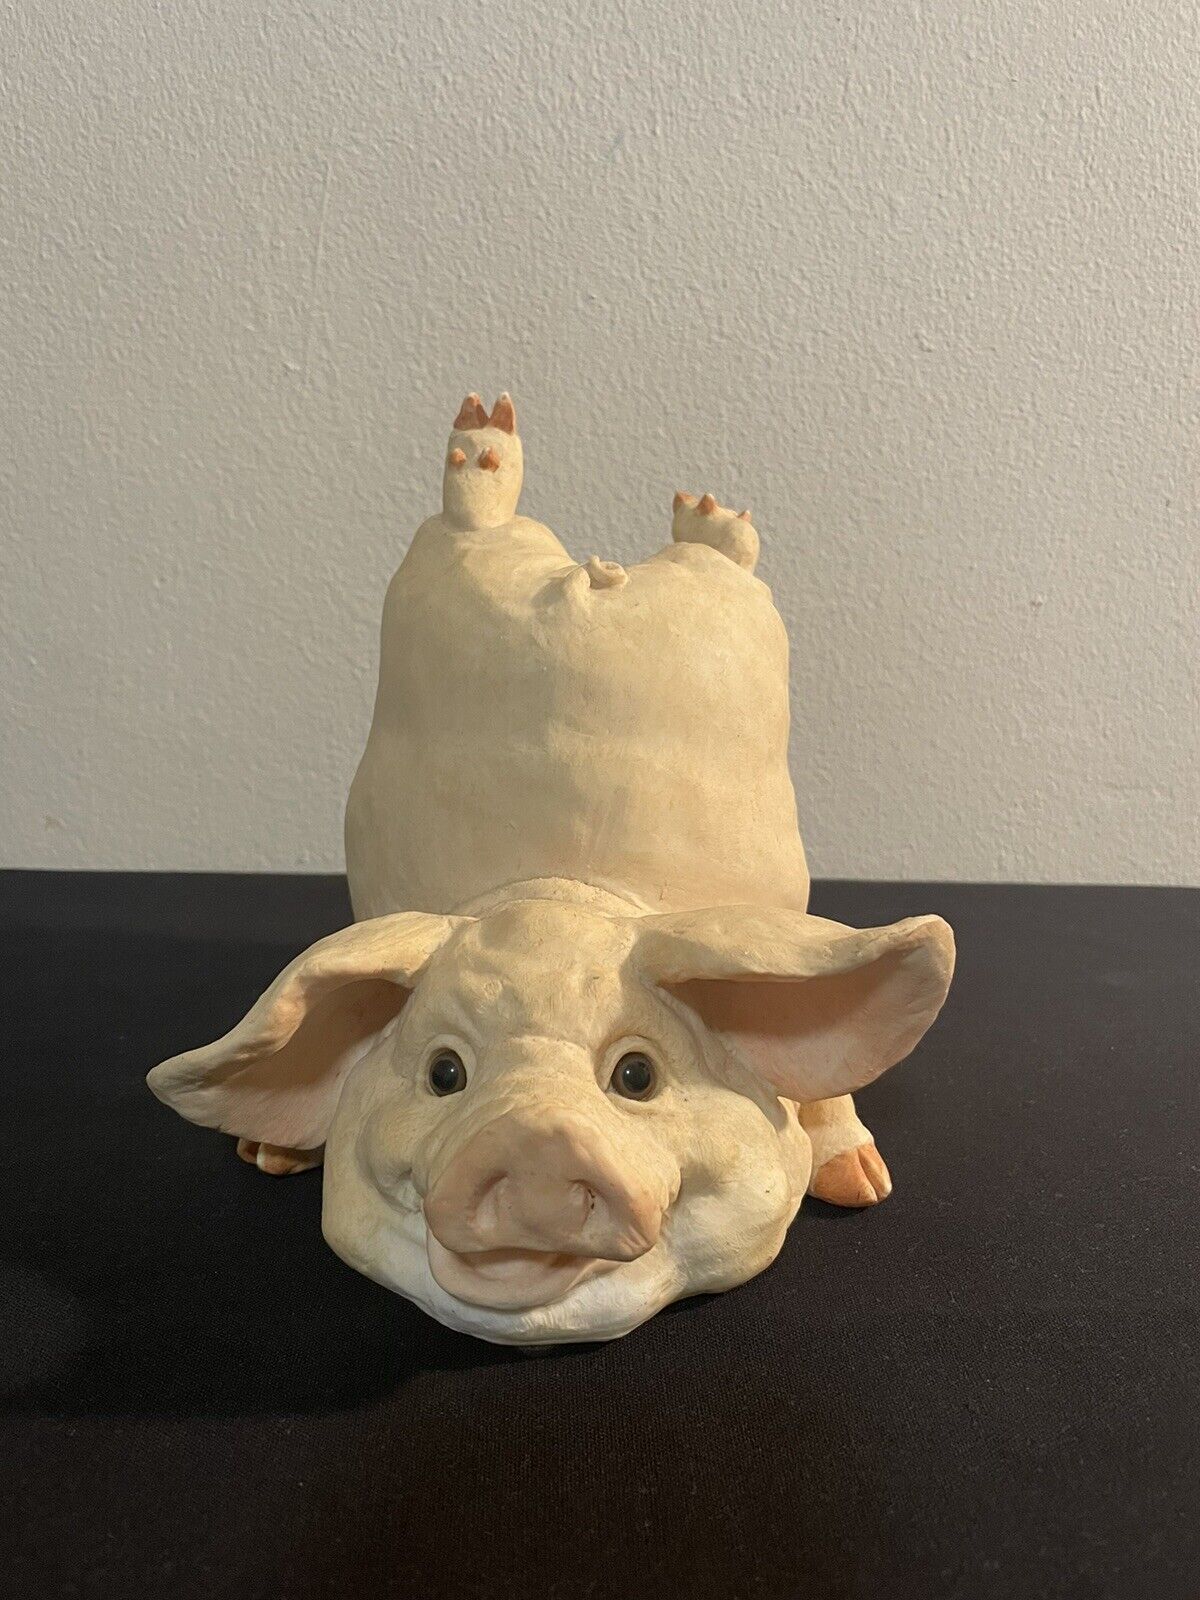 🐷 Vintage 2000 Sealmark Resin 6” LARGE CUTE Pig Piggy Bank with Stopper 🐷